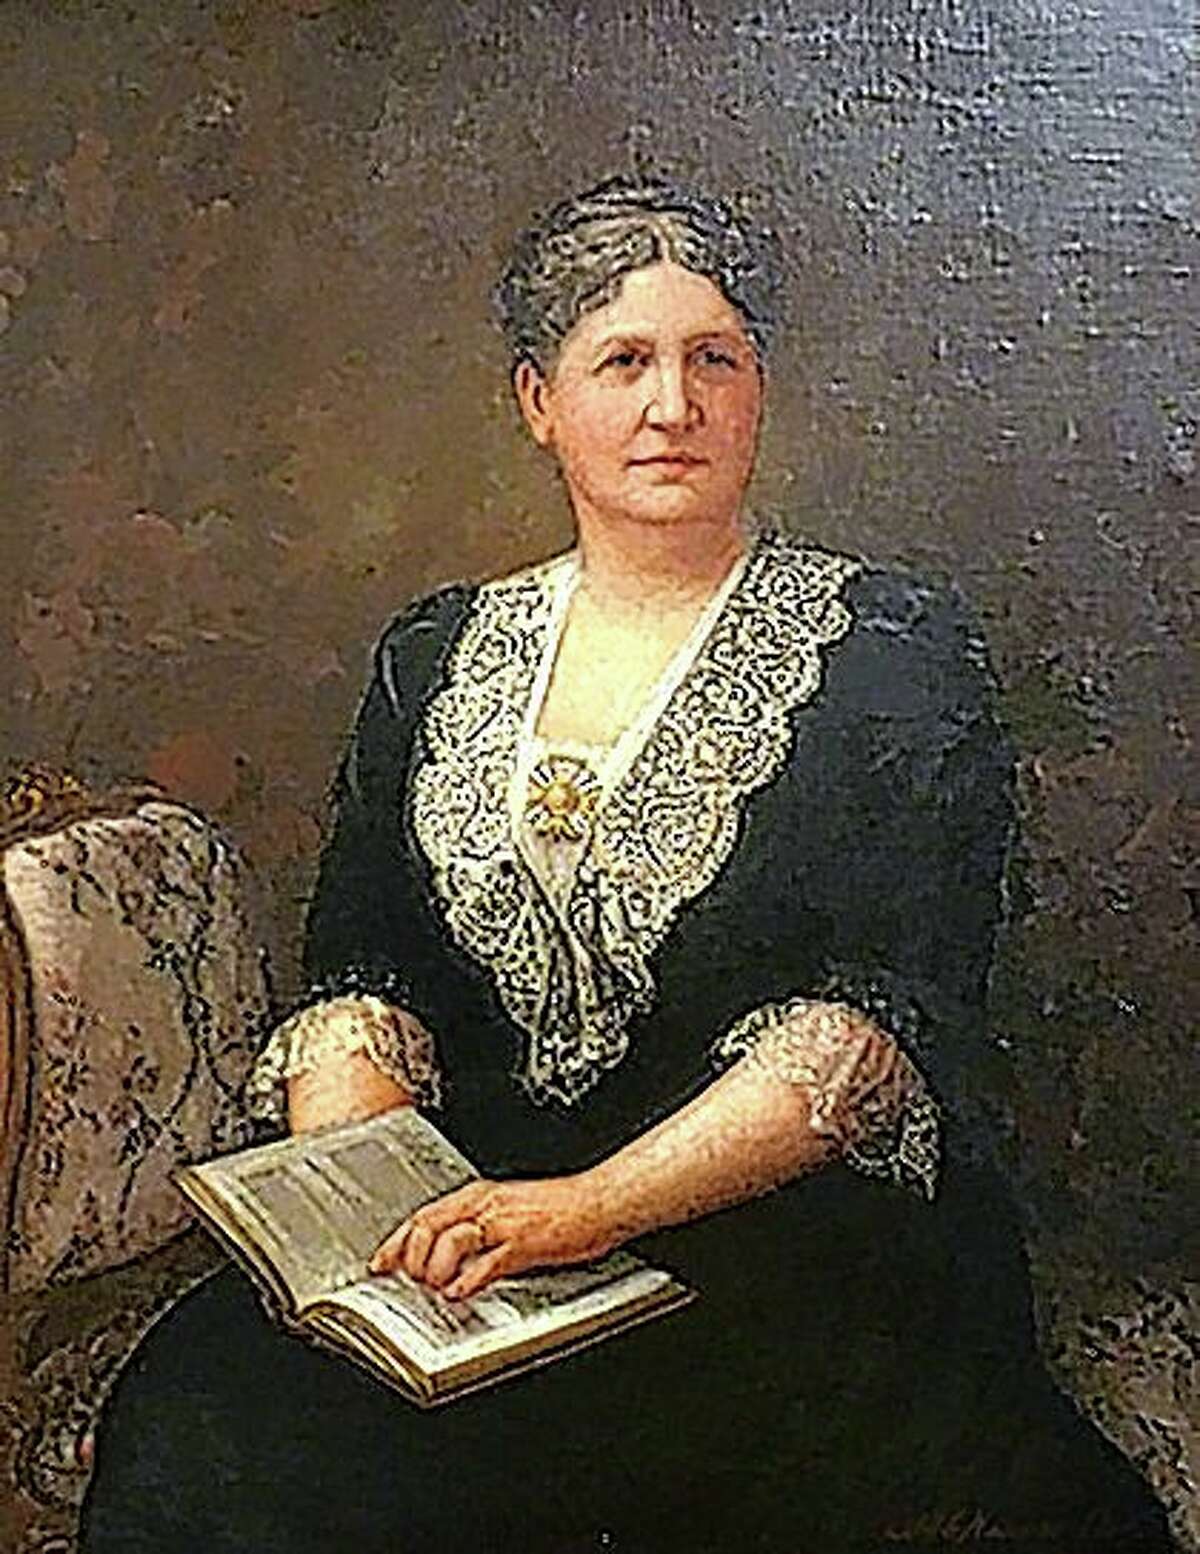 Jacksonville native Ellen Hardin Walworth was instrumental in founding Daughters of the American Revolution. She had wide-ranging interests, particularly in science and history.